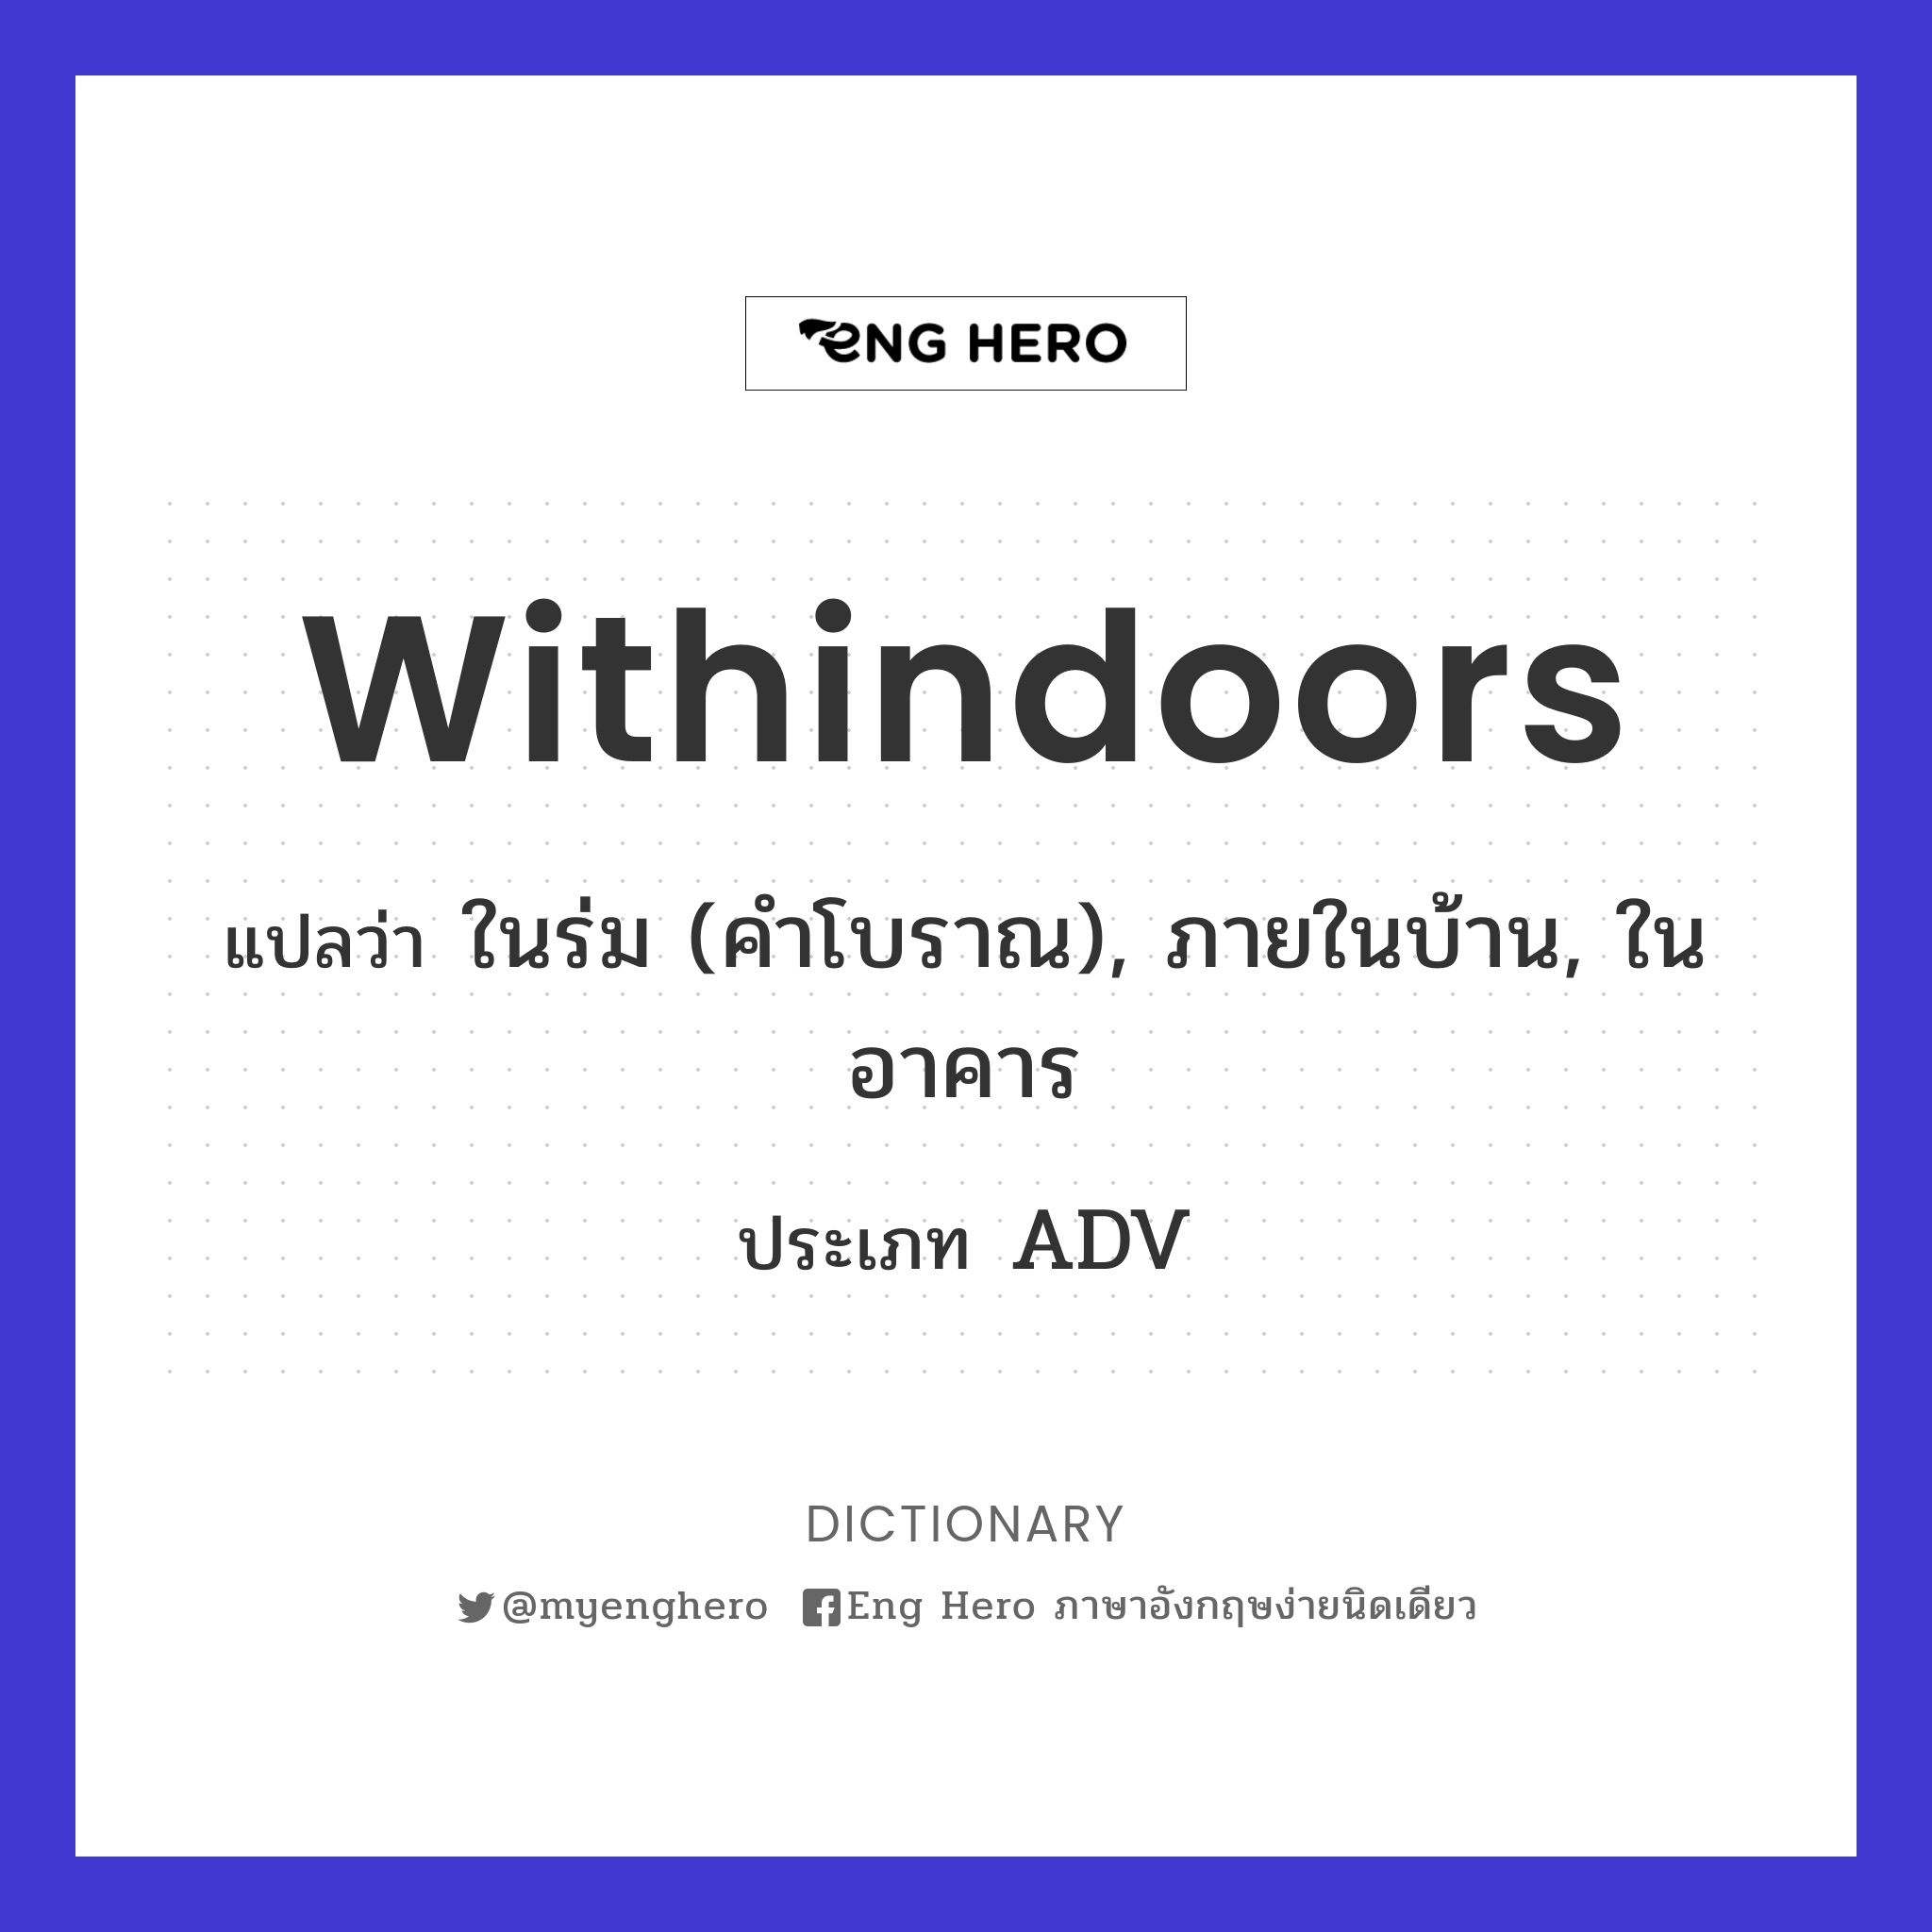 withindoors